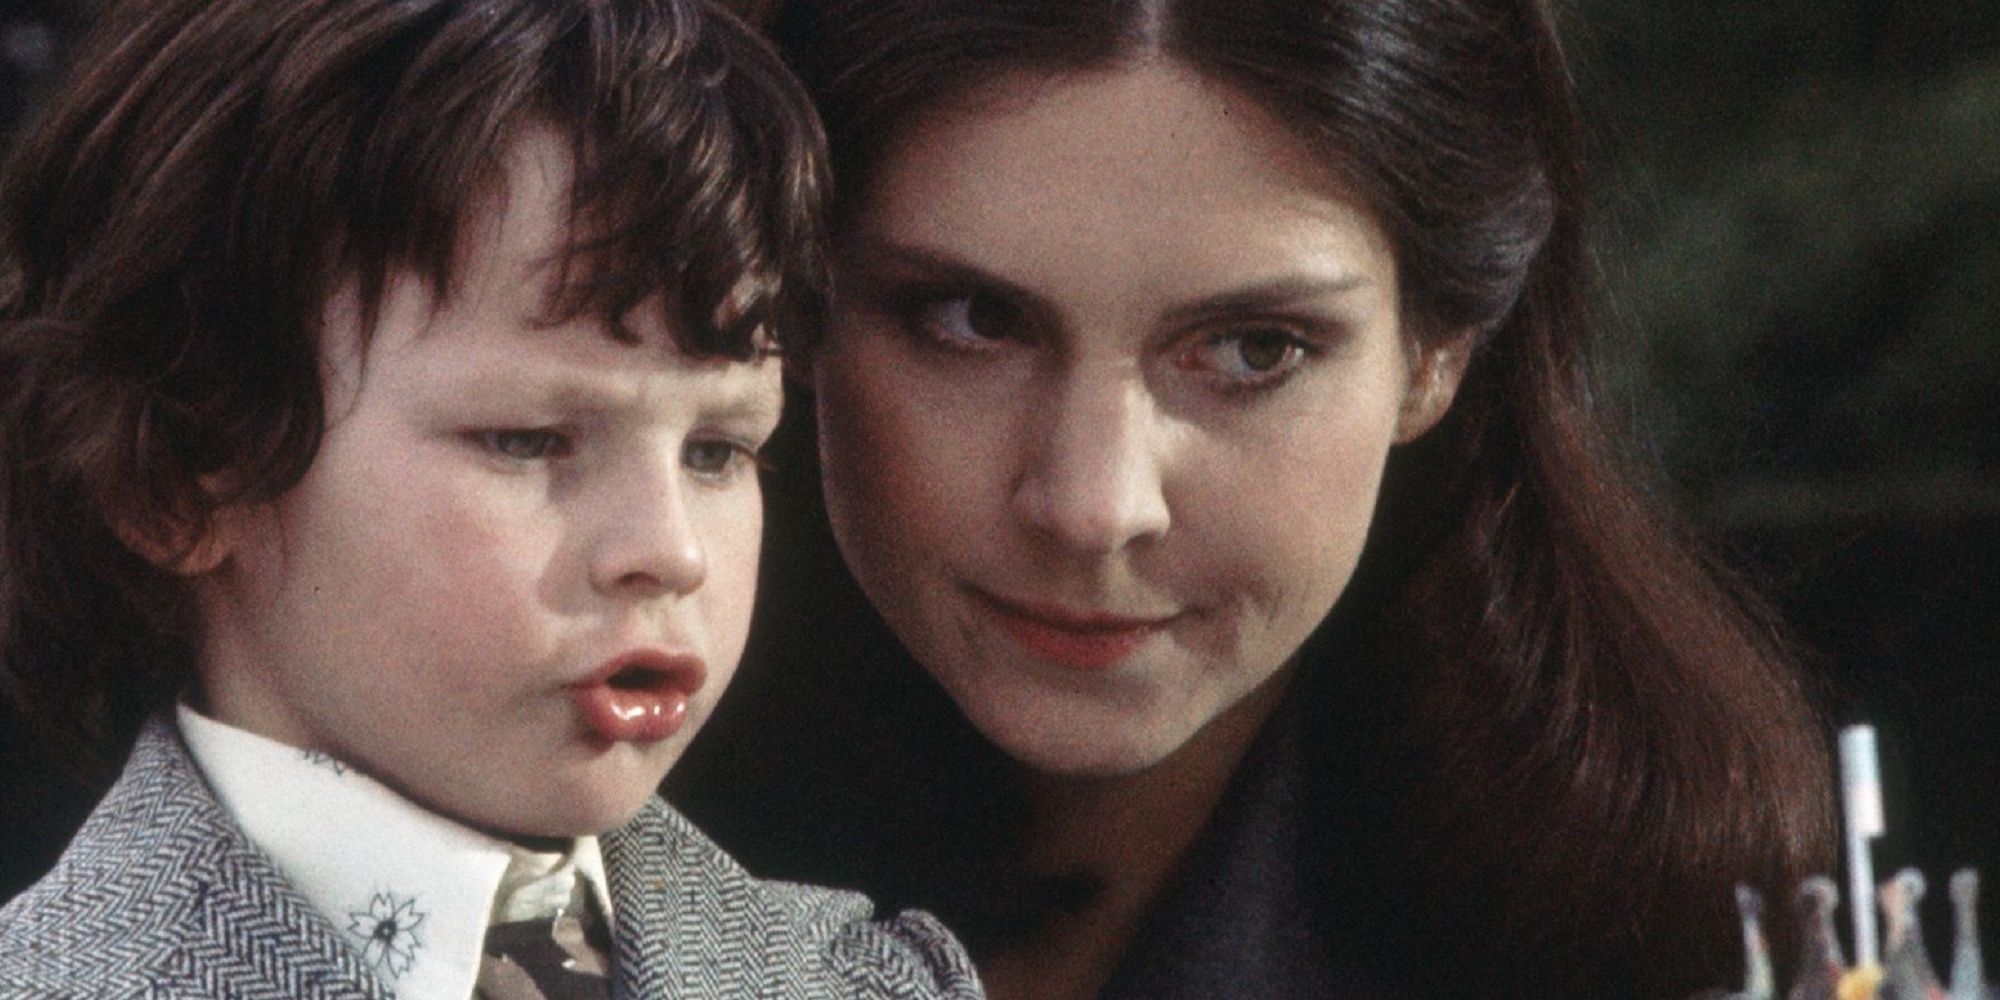 The Omen - Damien and Nanny looking at birthday cake